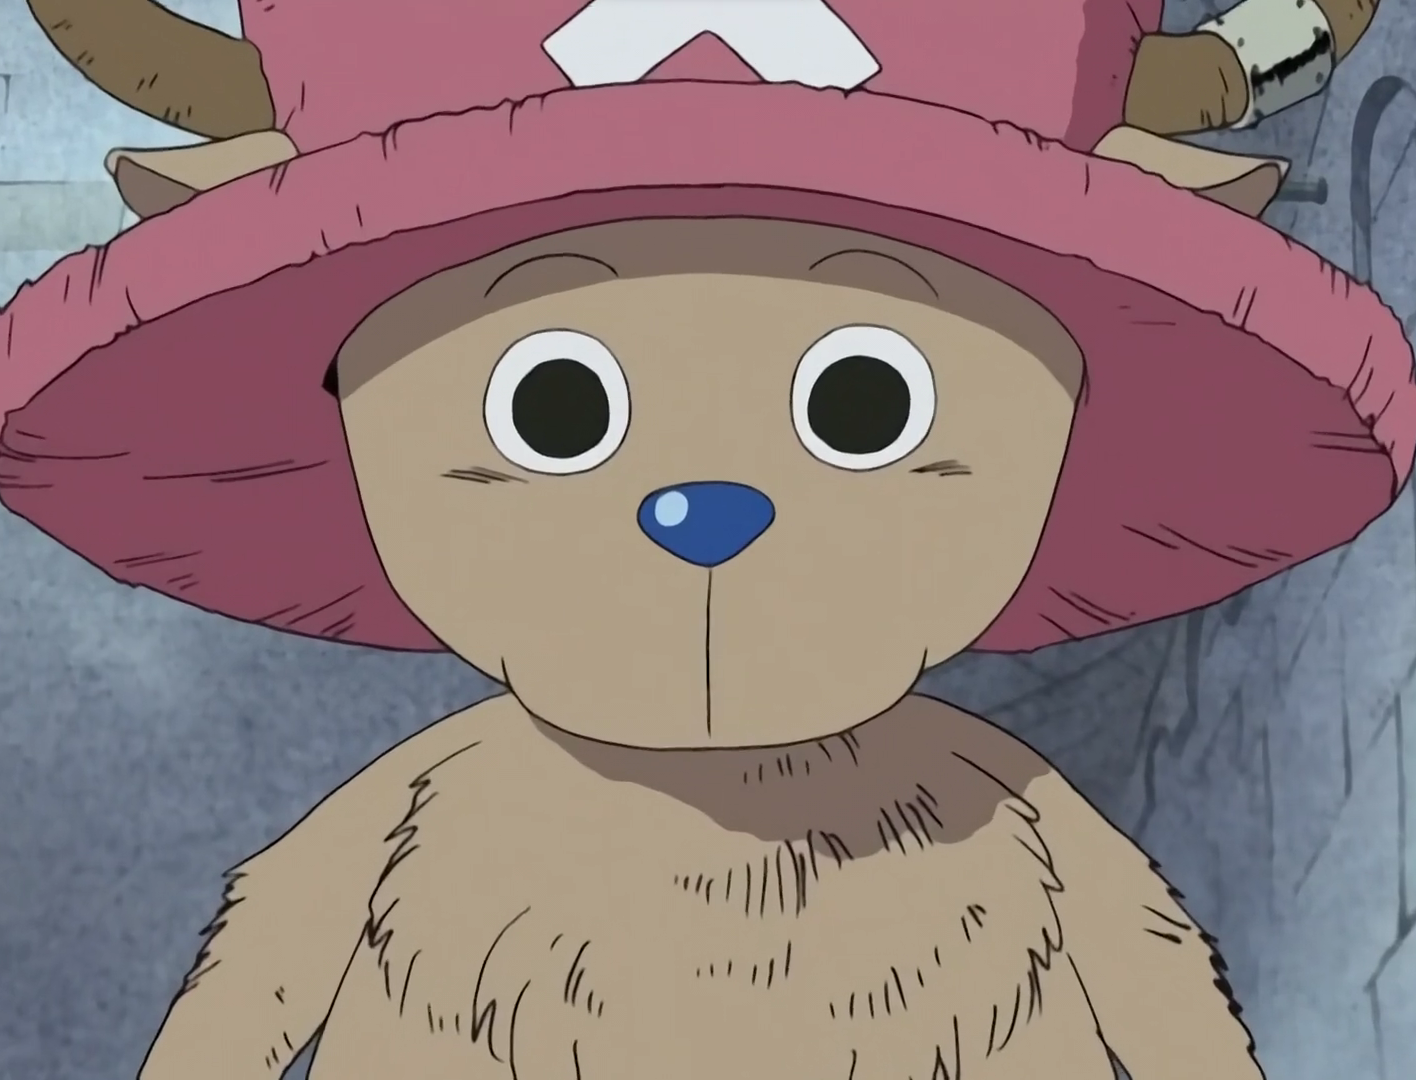 One Piece Chopper looks at Luffy with intrigue